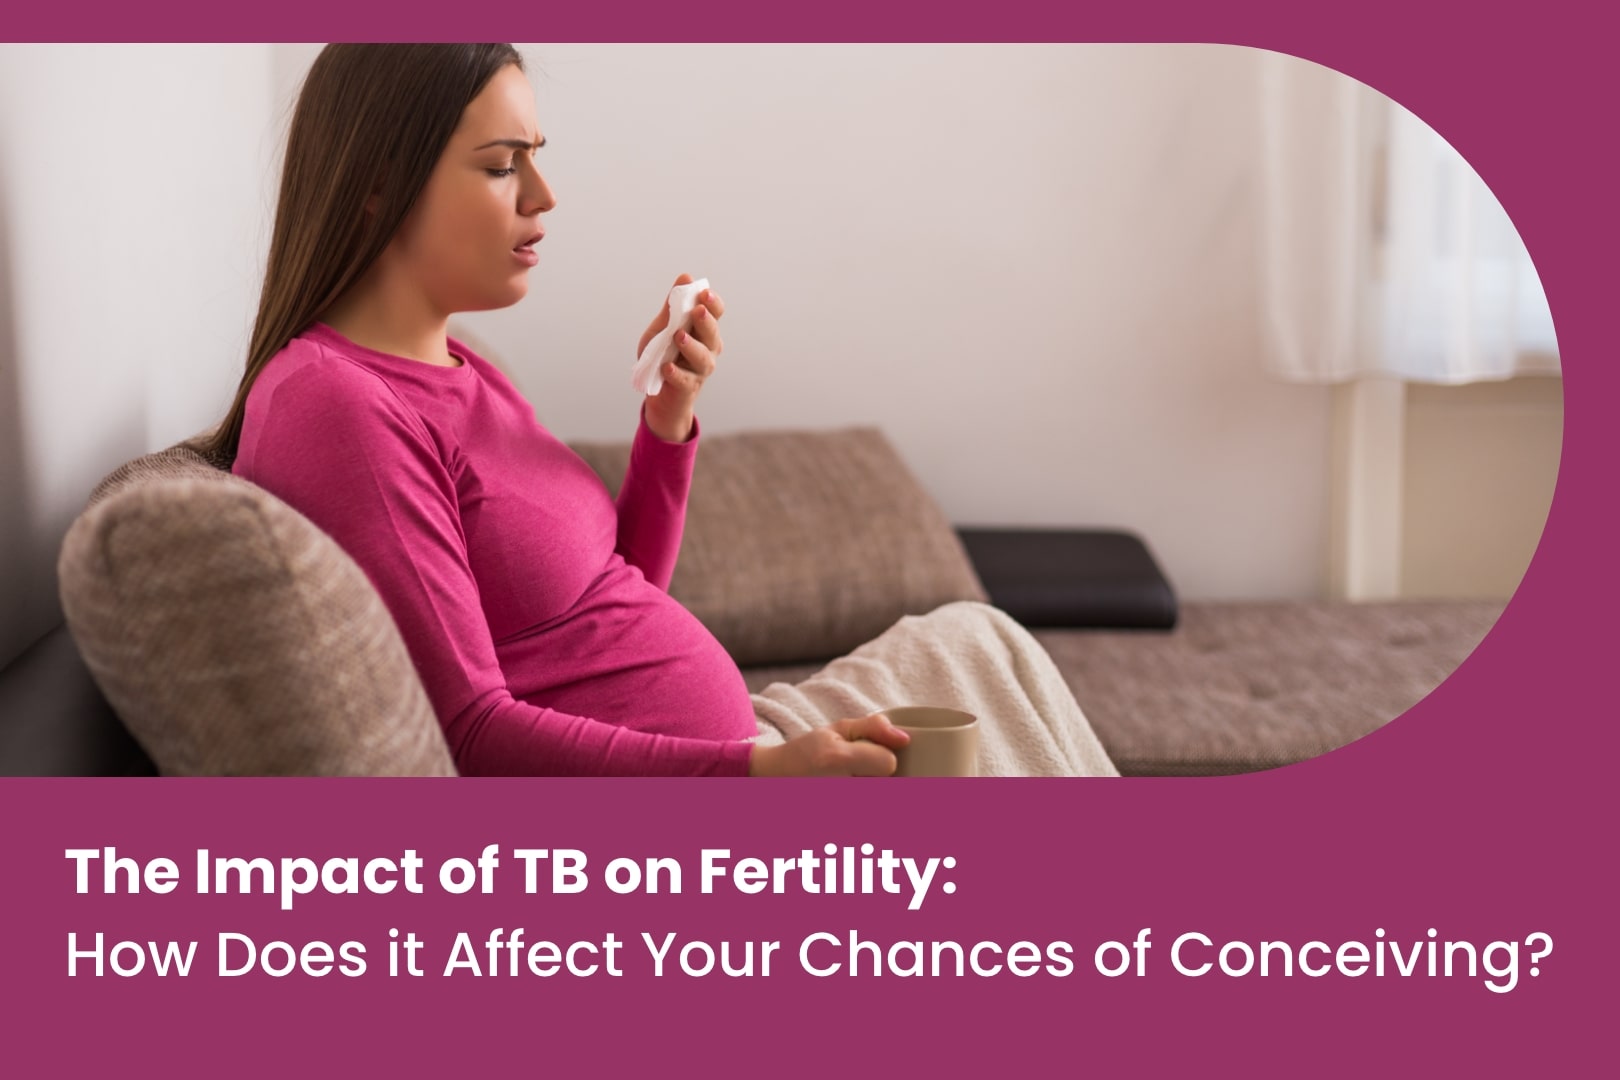 The Impact of TB on Fertility: How Does it Affect Your Chances of Conceiving?